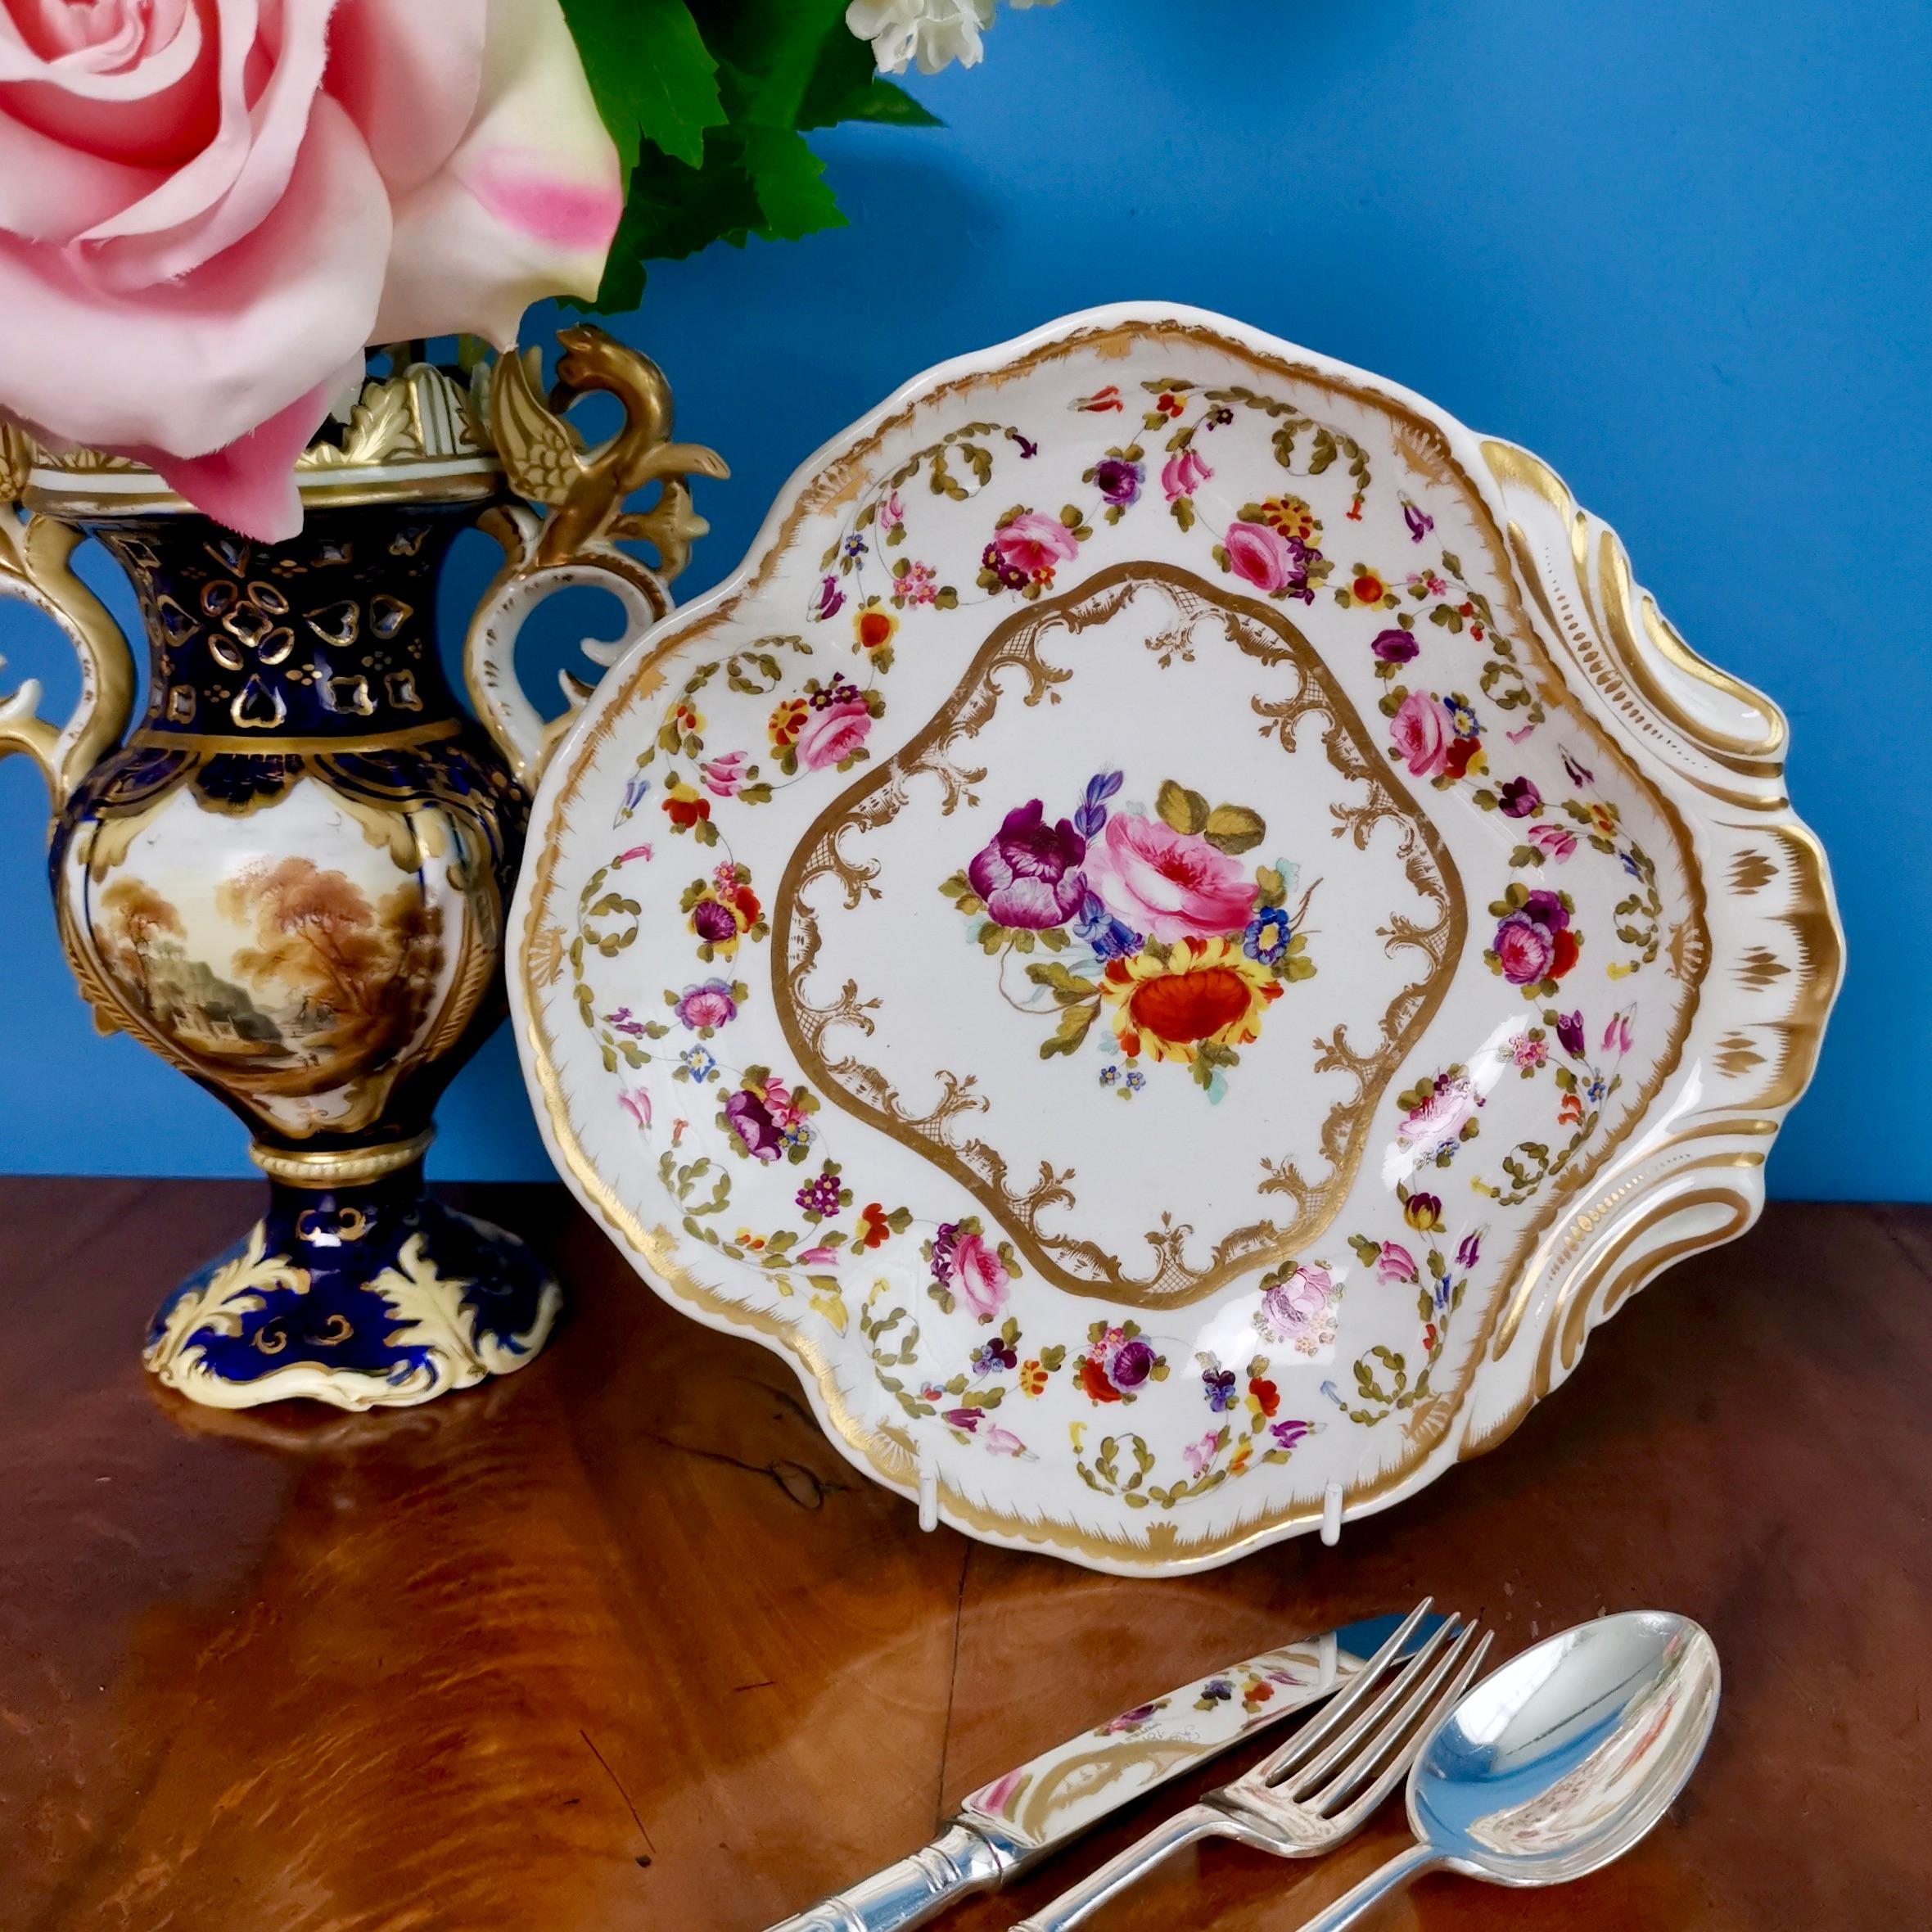 This is a beautiful one-handled dessert serving dish or 